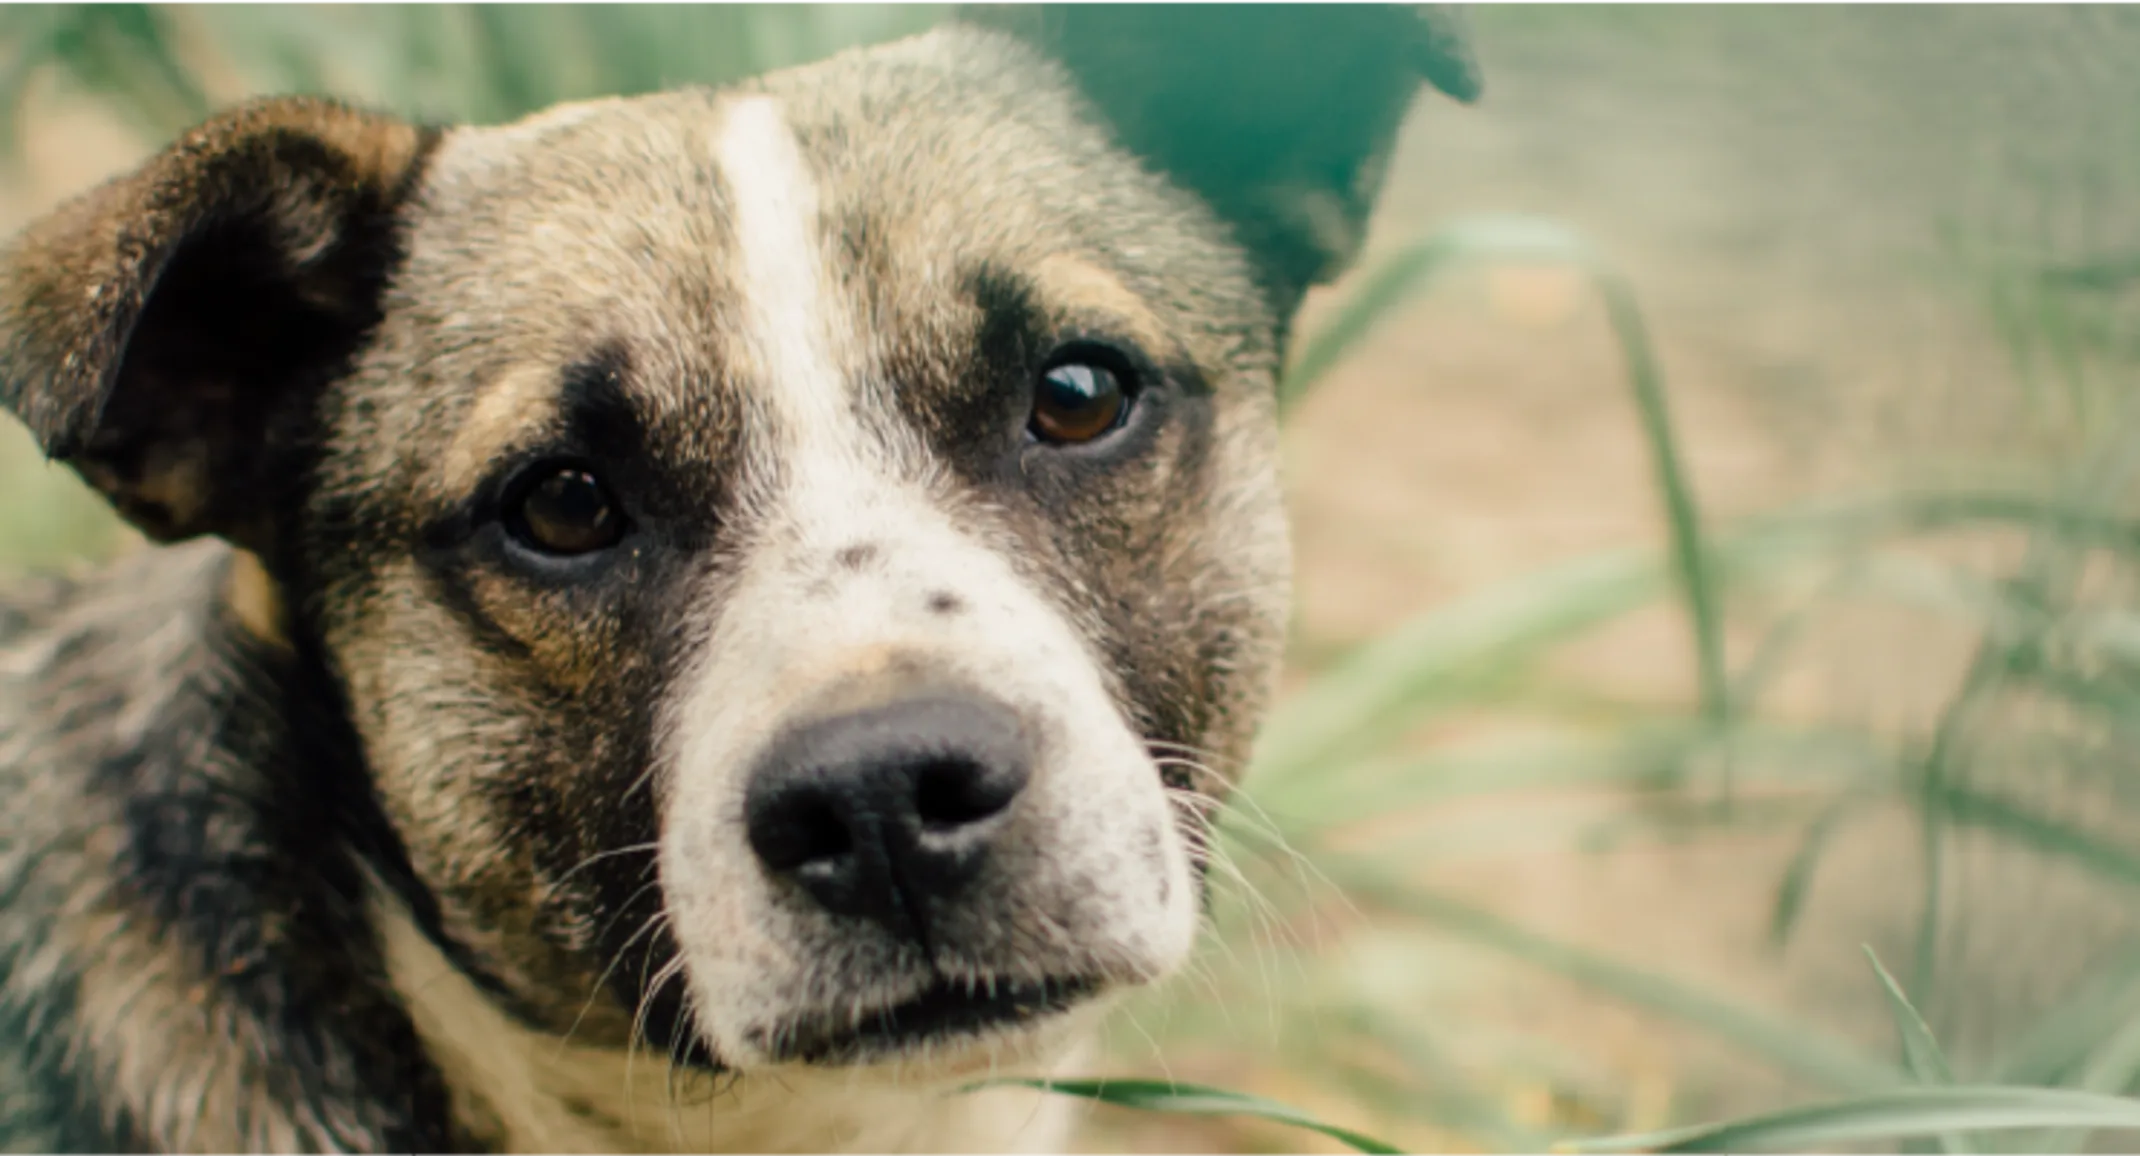 A closeup of a dog standing in tall grass looking at the camera.